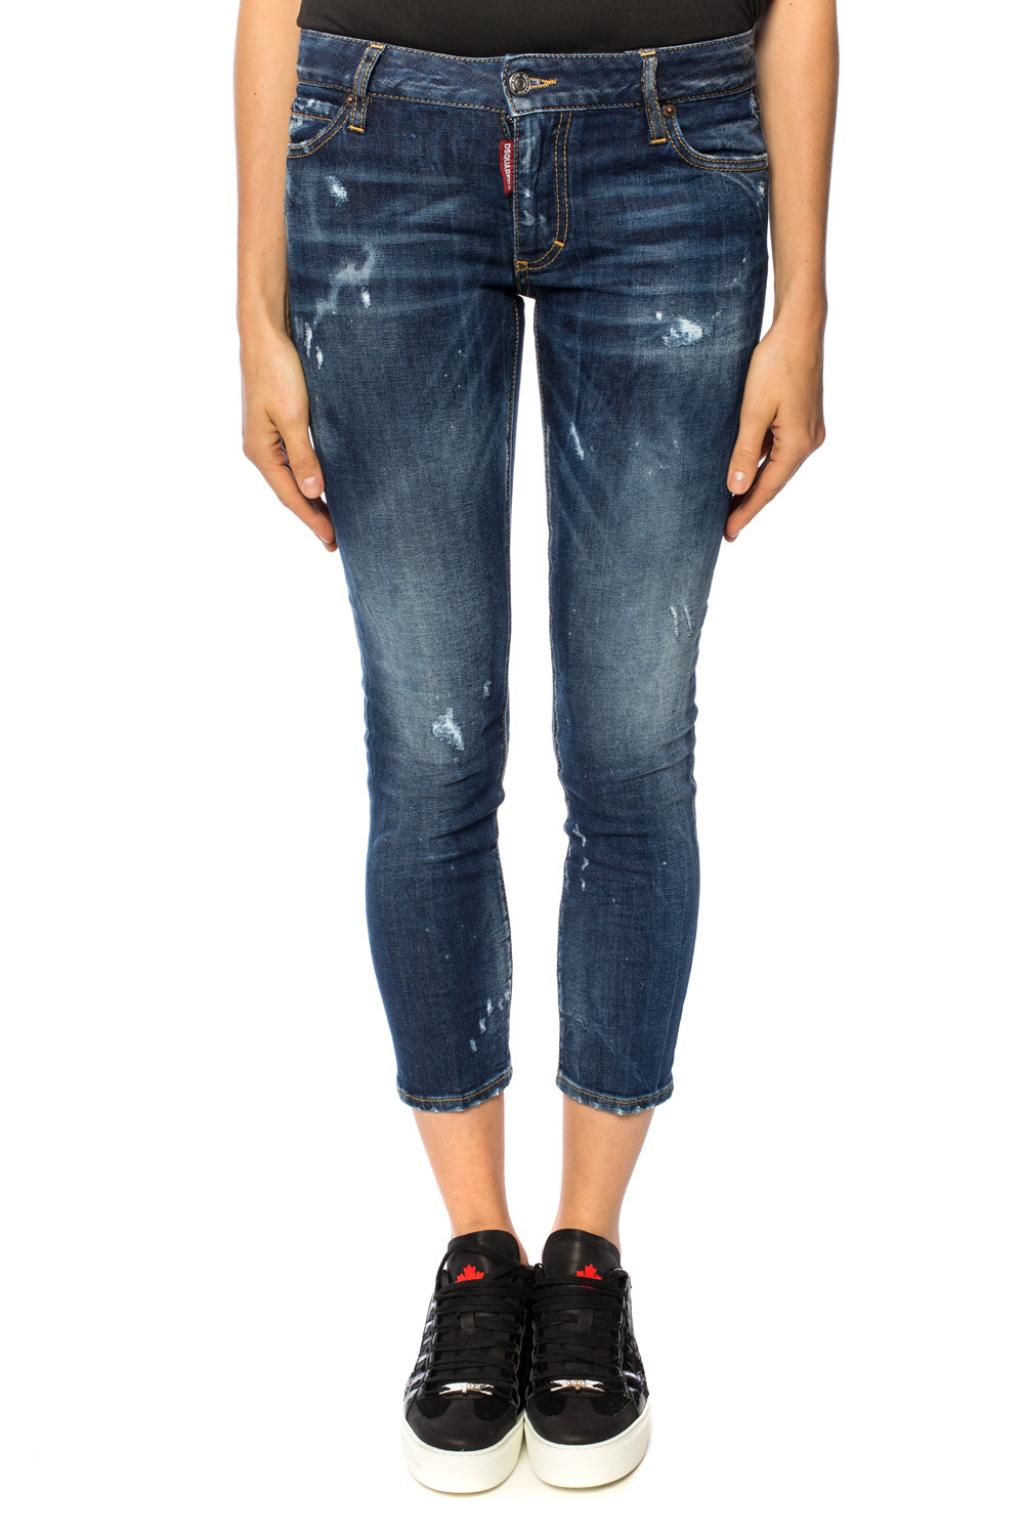 Dsquared2 'Runway Straight Cropped Jean' jeans | Women's Clothing ...